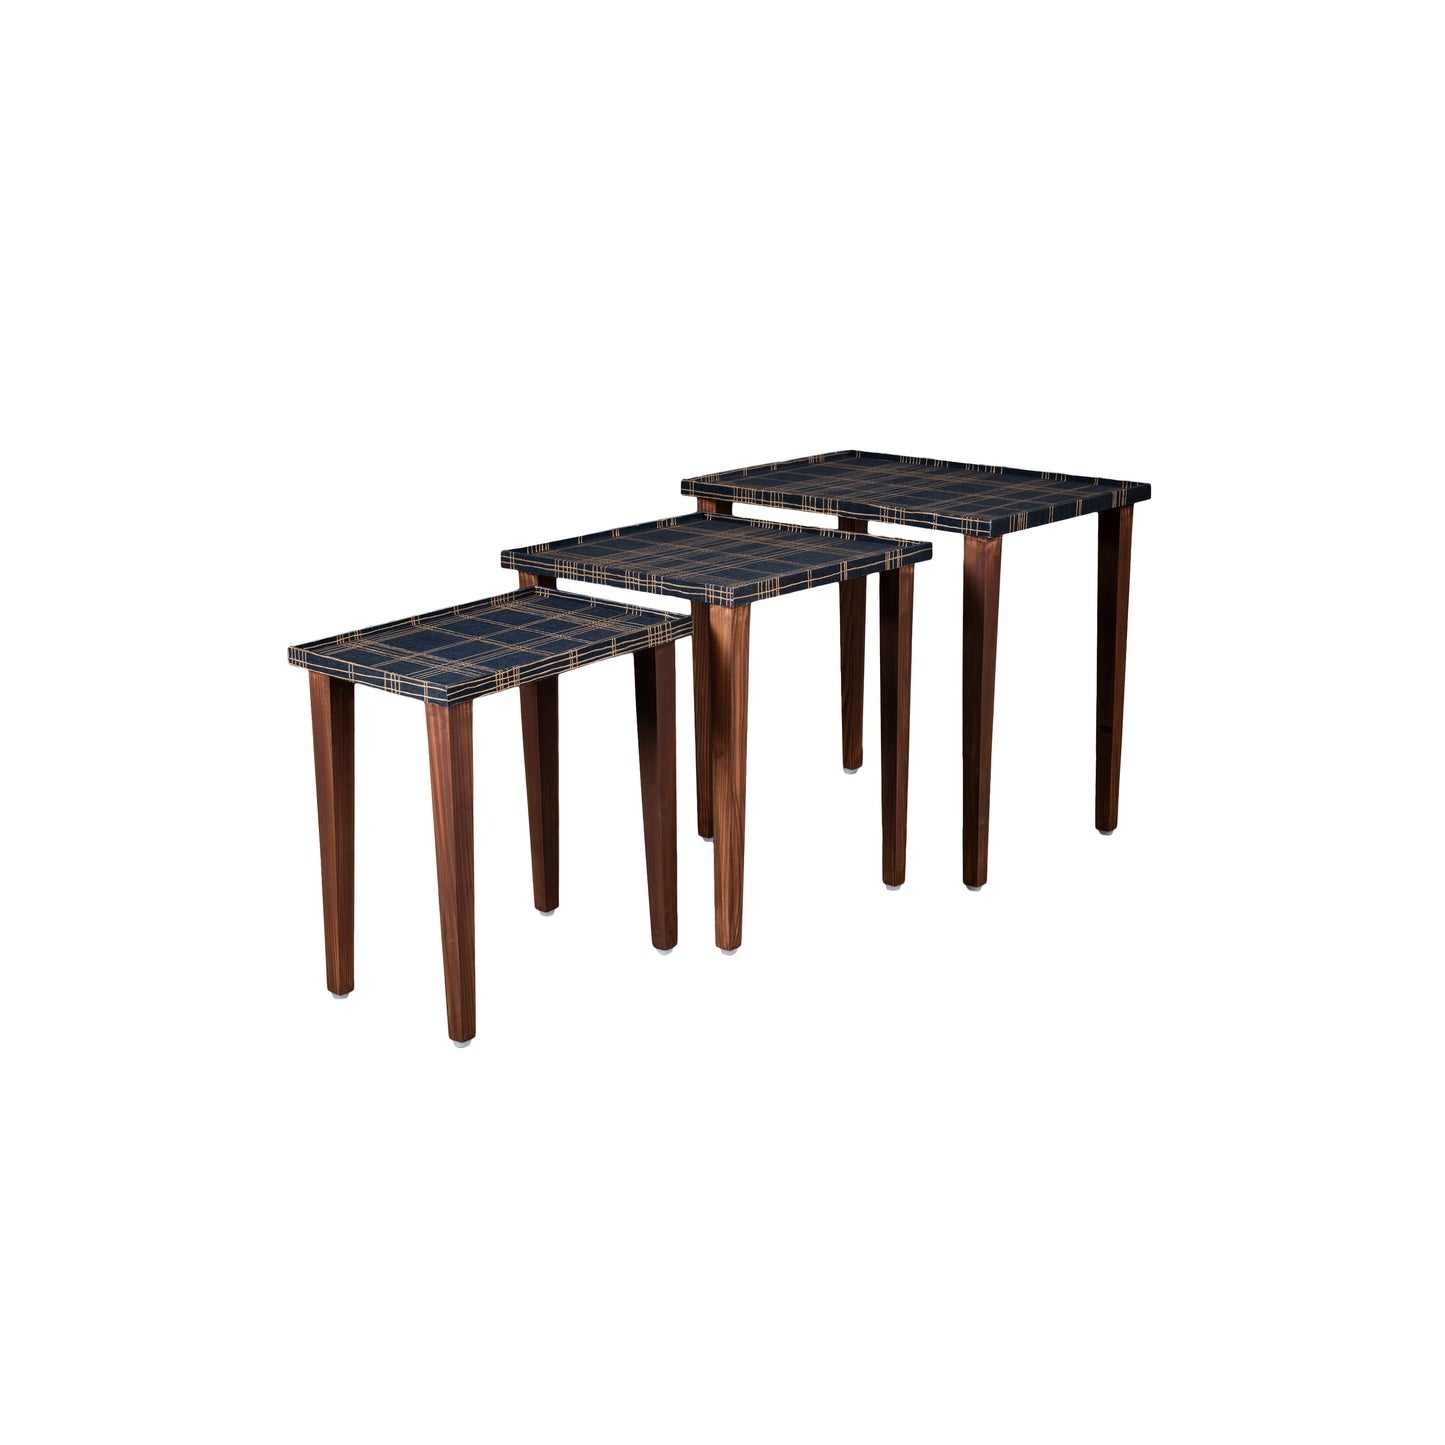 A Tiny Mistake Tesseract Wooden Rectangle Nesting Tables (Set of 3), Living Room Decor